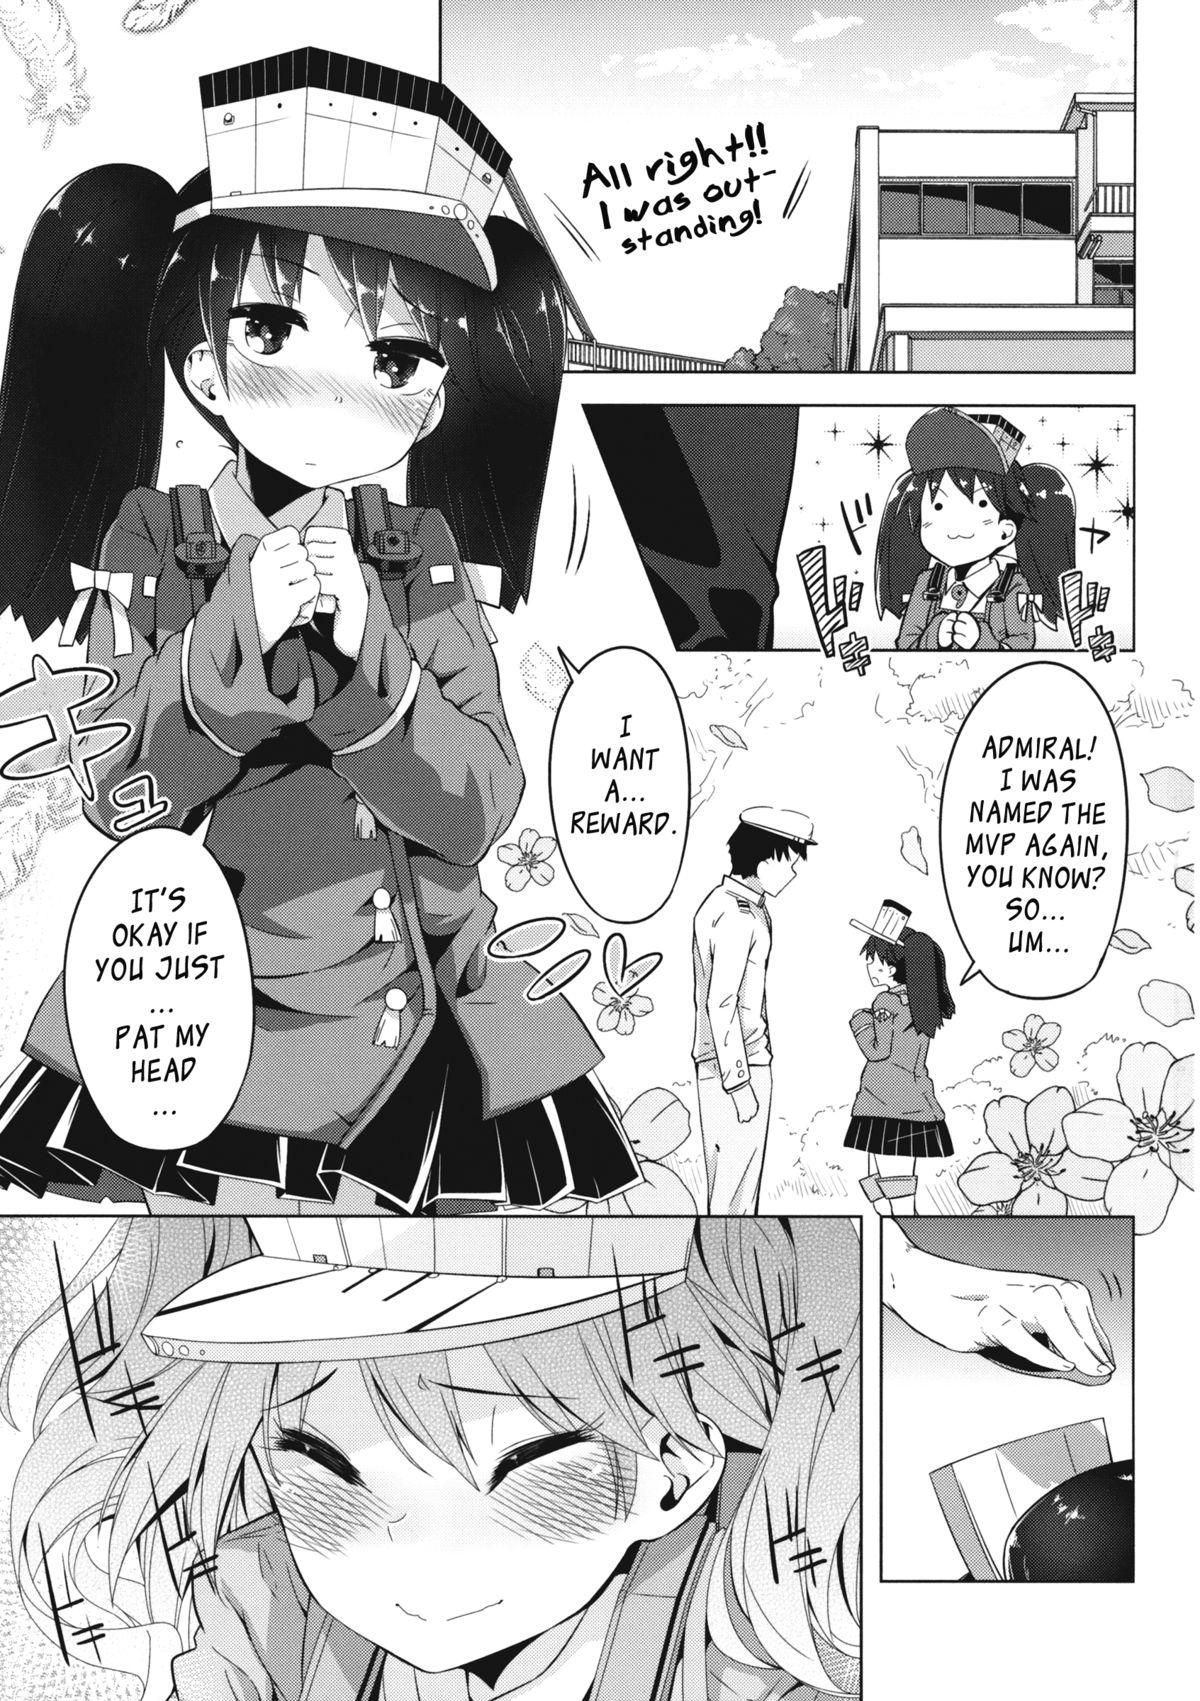 Live Koi suru Otome no Miryoku wa Mune dake janai! | The Allure of a Maiden in Love isn't Only in Her Chest! - Kantai collection Facefuck - Page 2